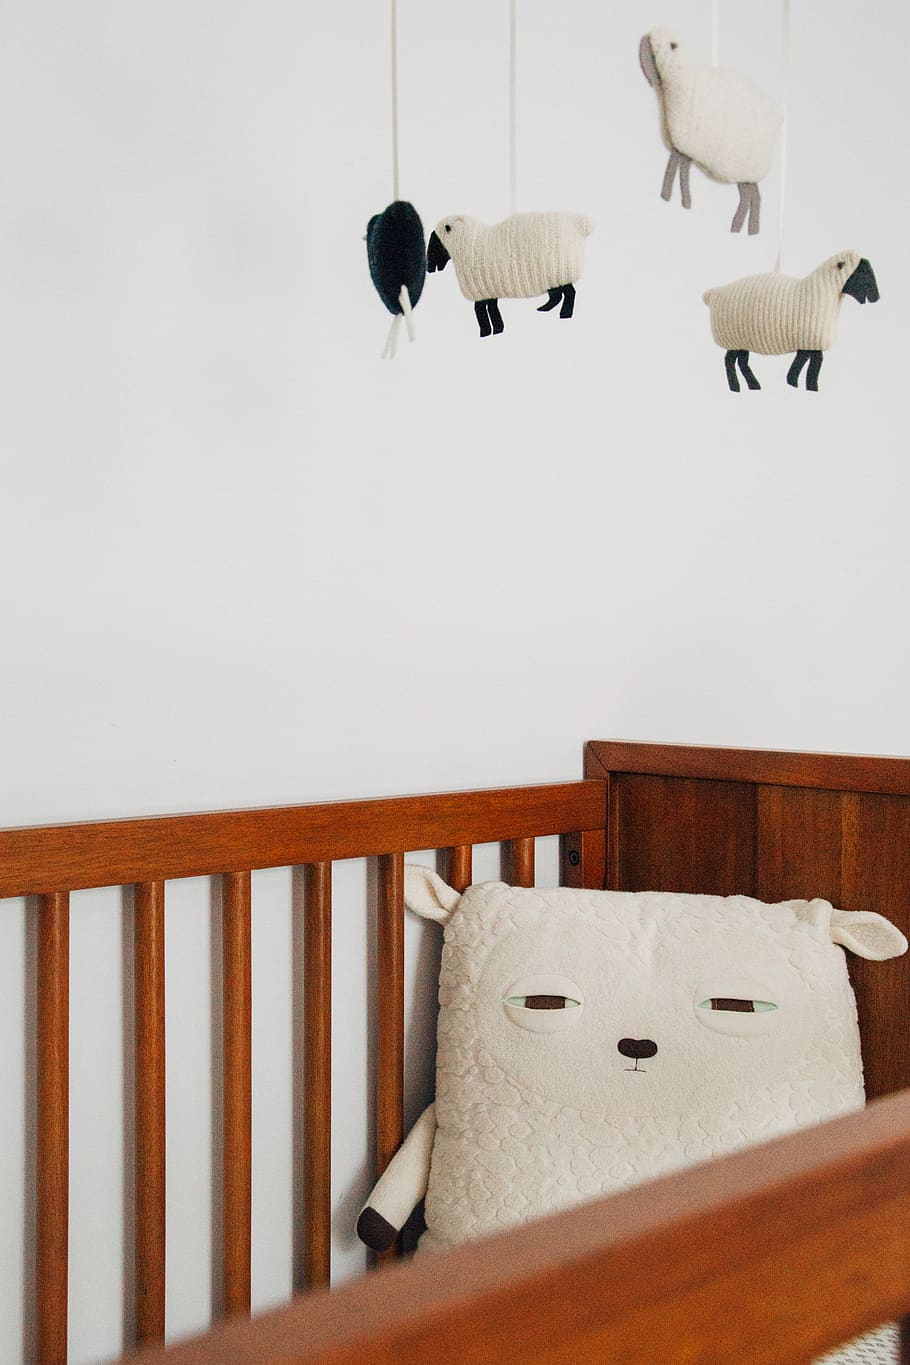 HD wallpaper: crib with sheep pillow and crib mobile, wood - material,  indoors | Wallpaper Flare